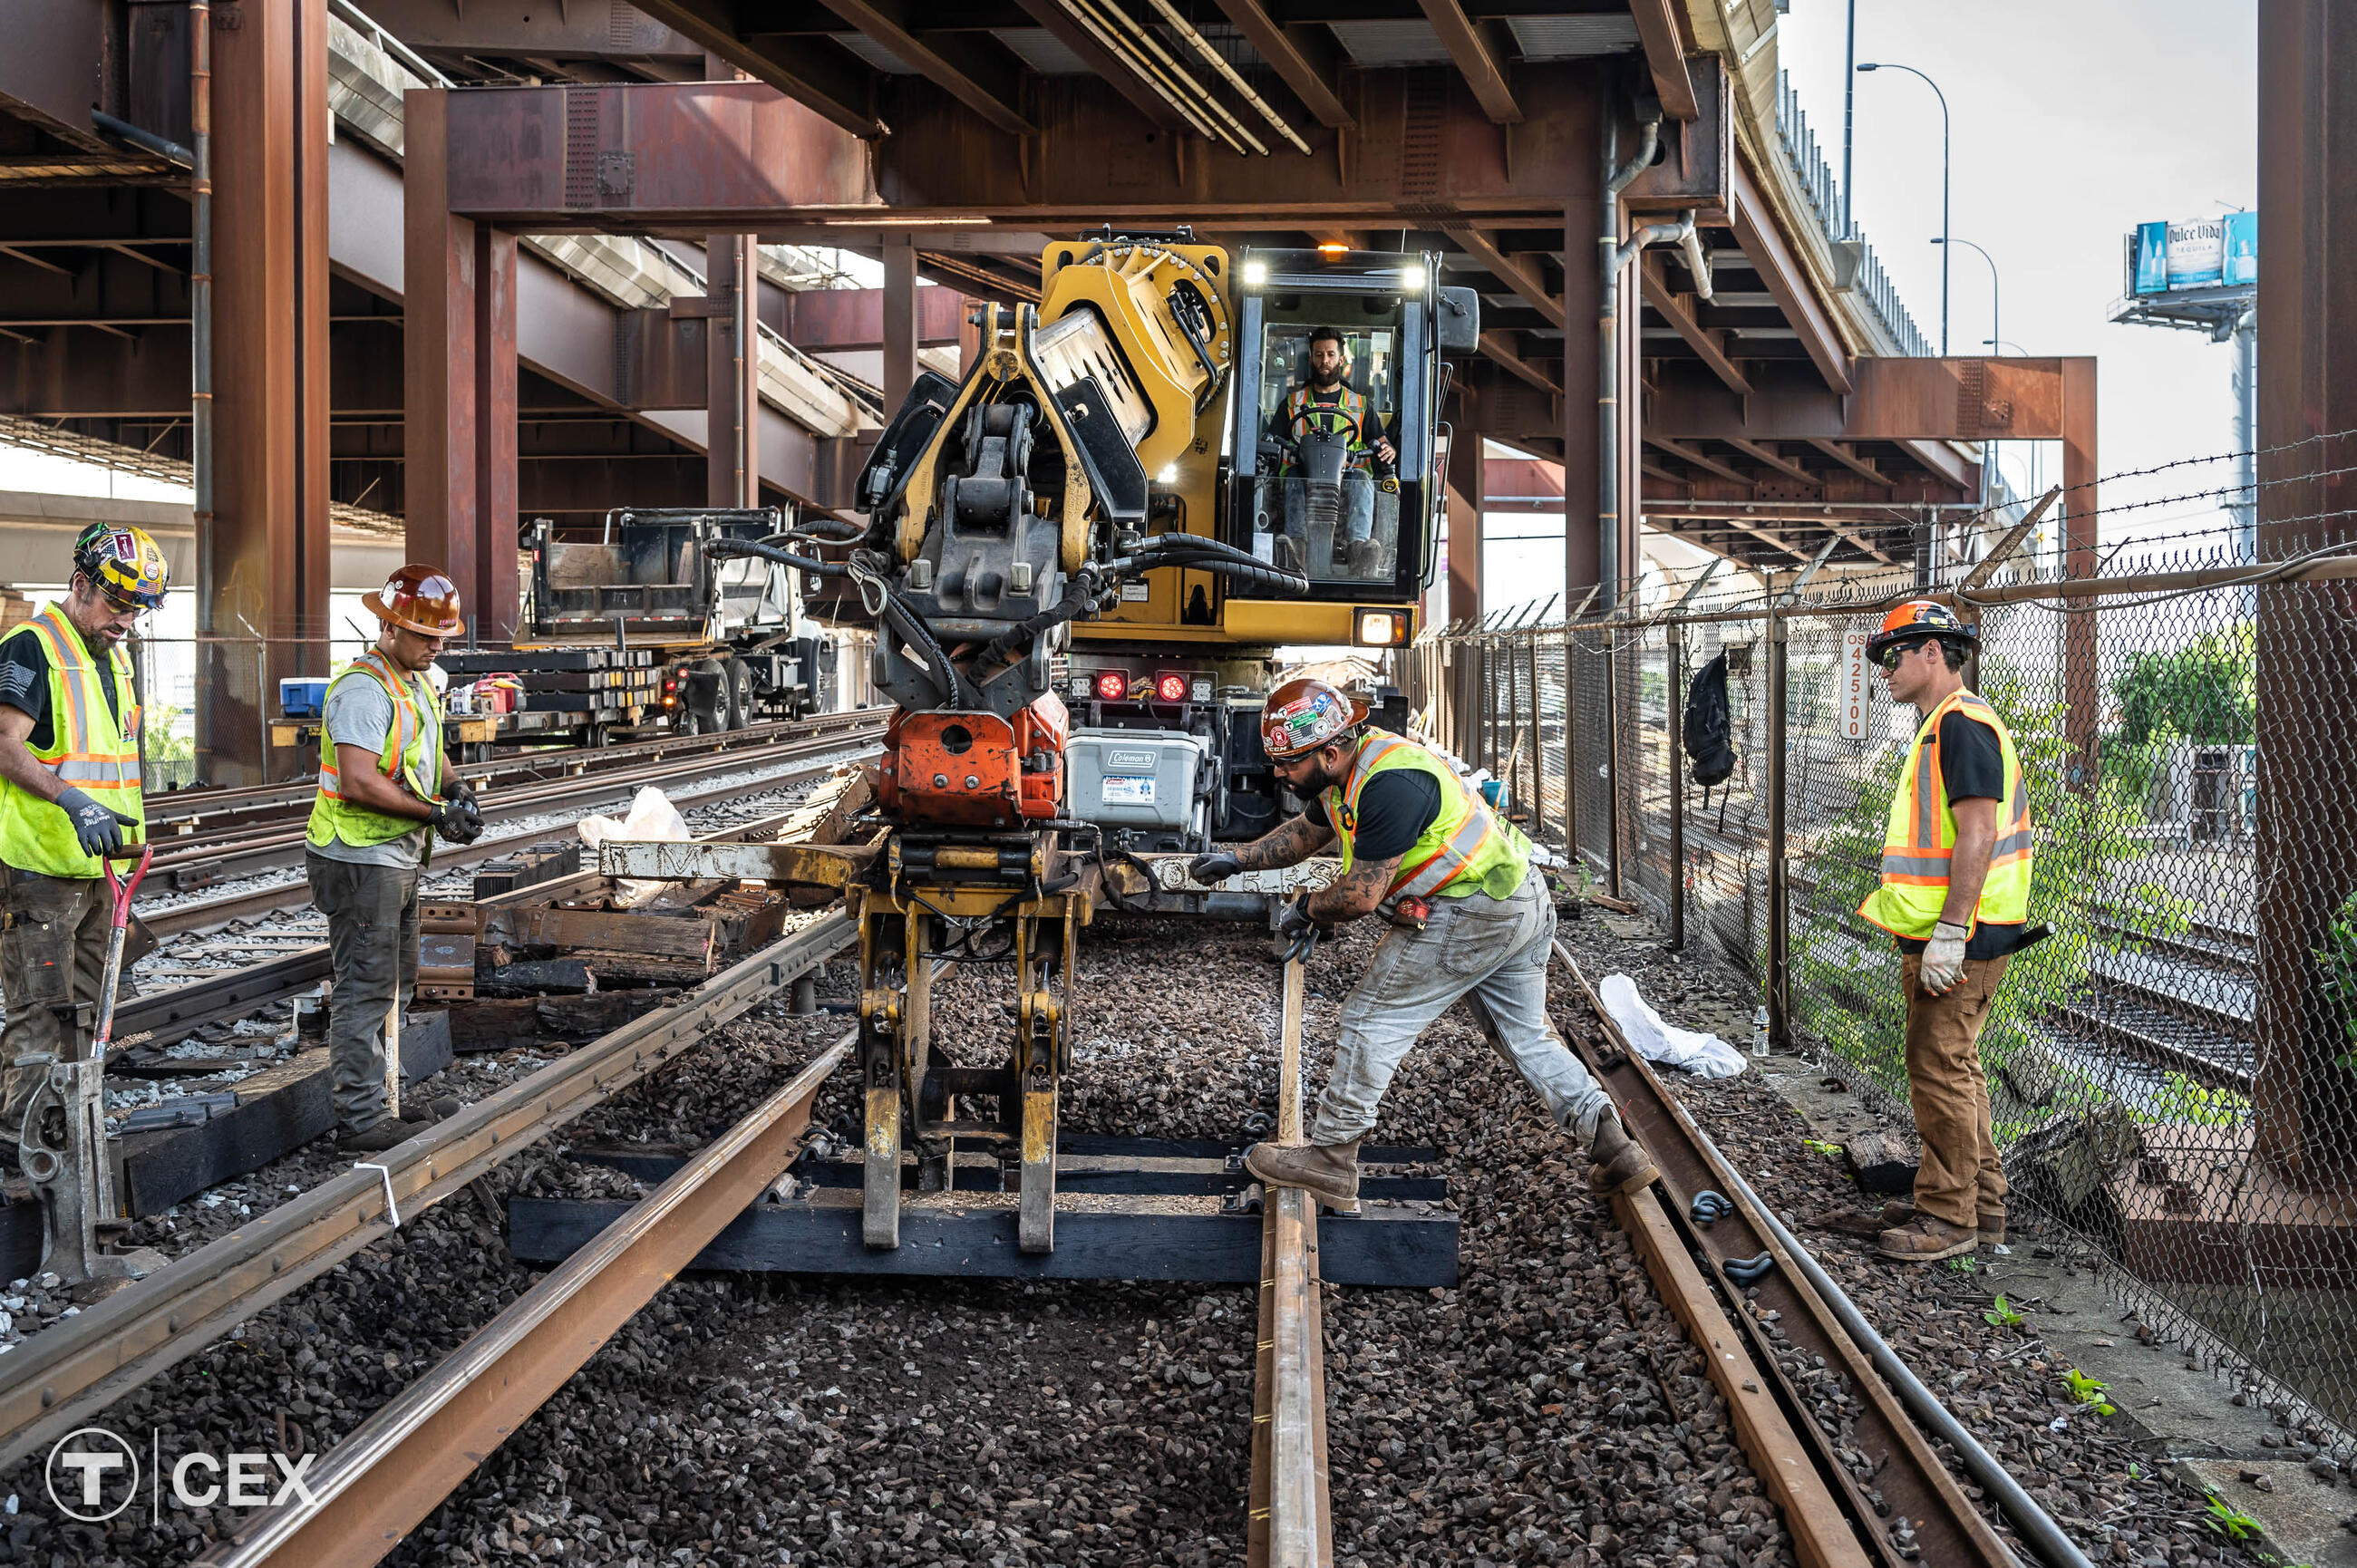 Crews worked to perform critical track and tie replacement work during this Orange Line diversion. Complimentary photo by the MBTA Customer and Employee Experience Department.